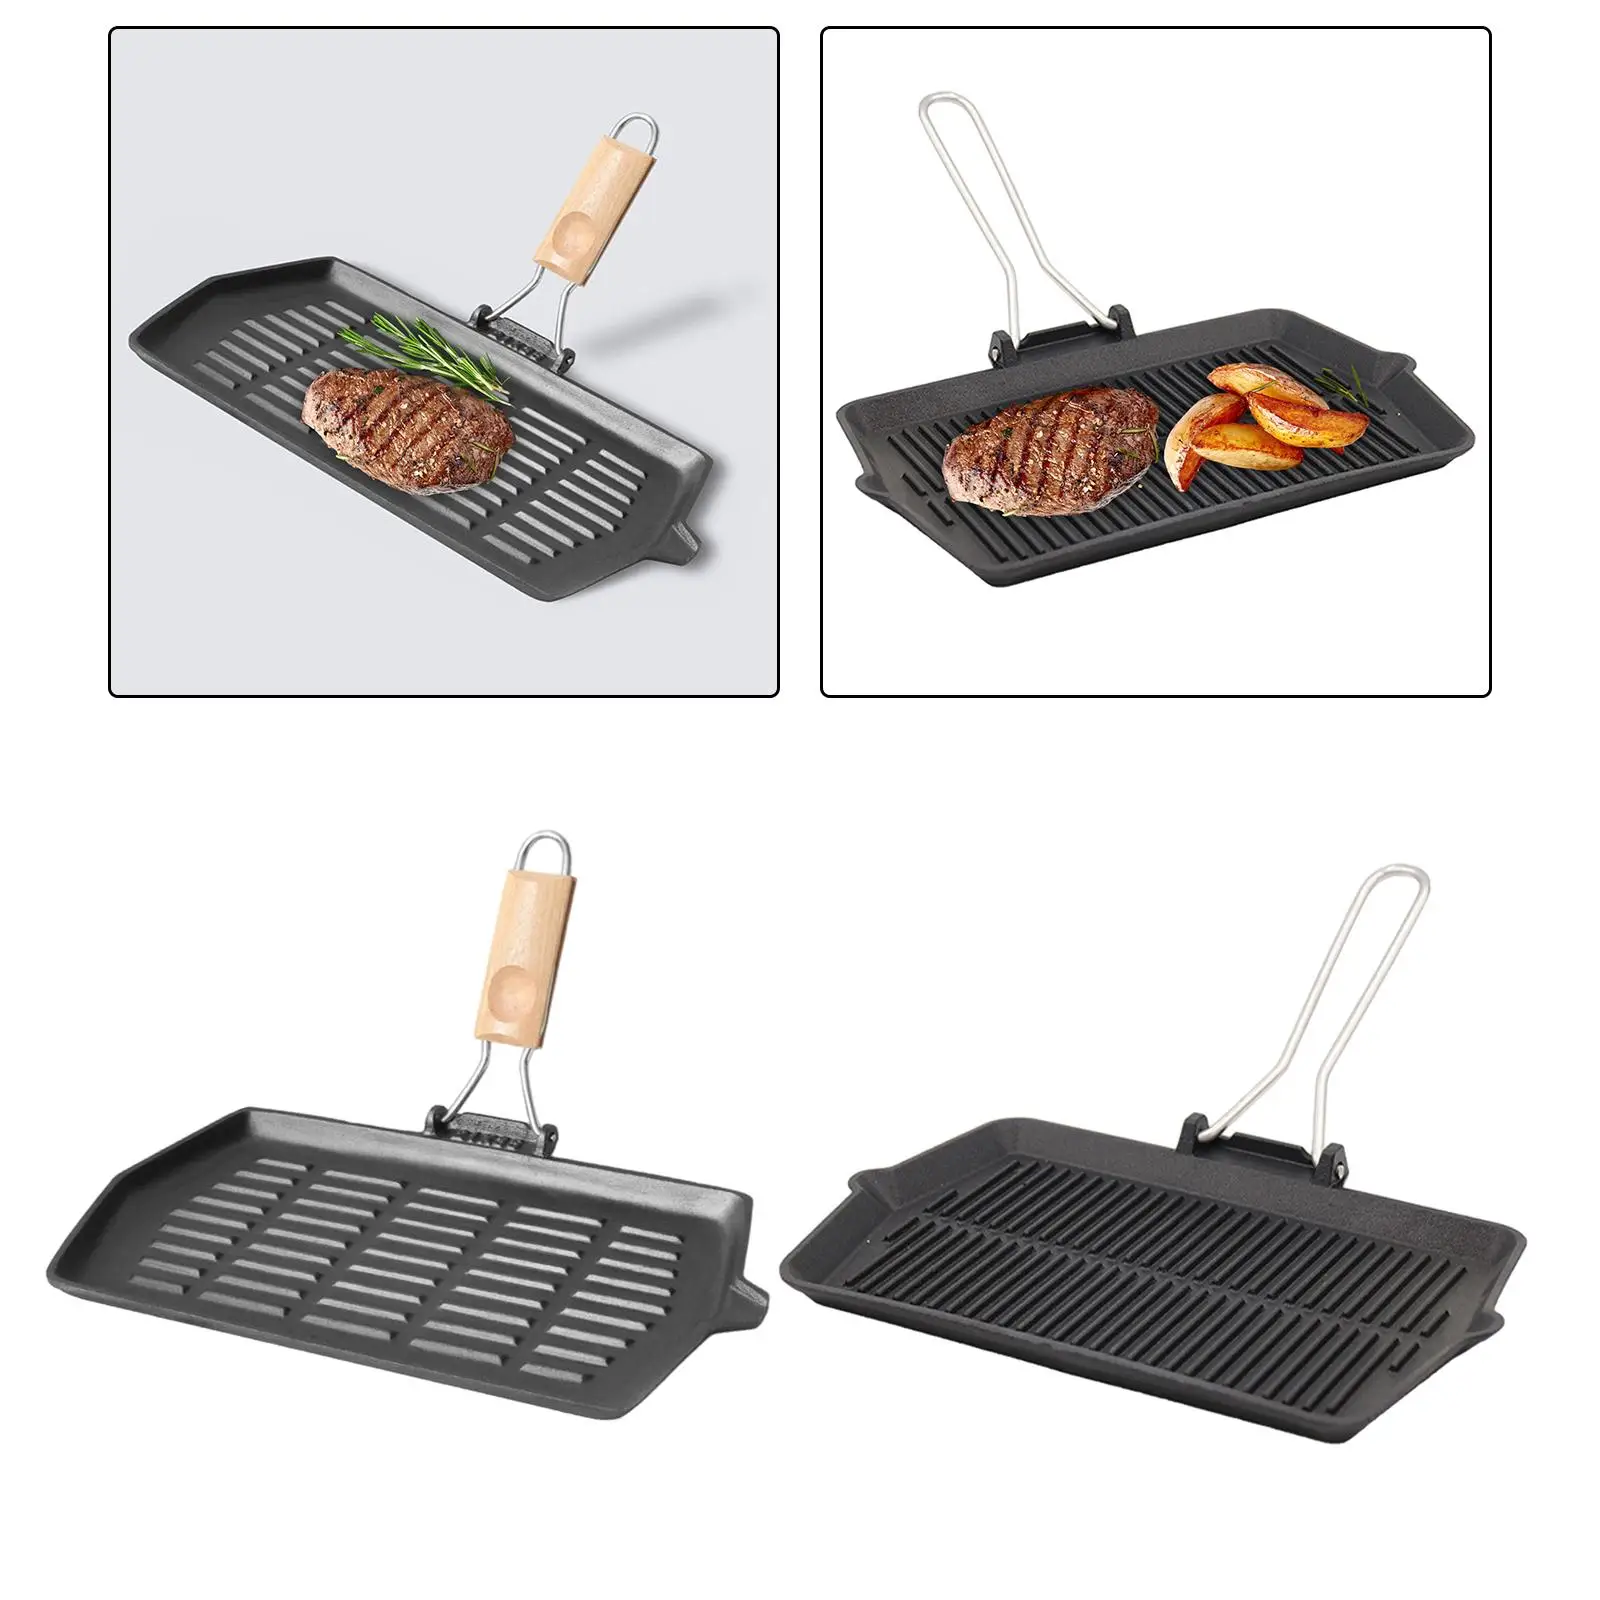 Grill Pan for Electrictop, Induction, Gas Cast Iron Nonstick Steak Pan